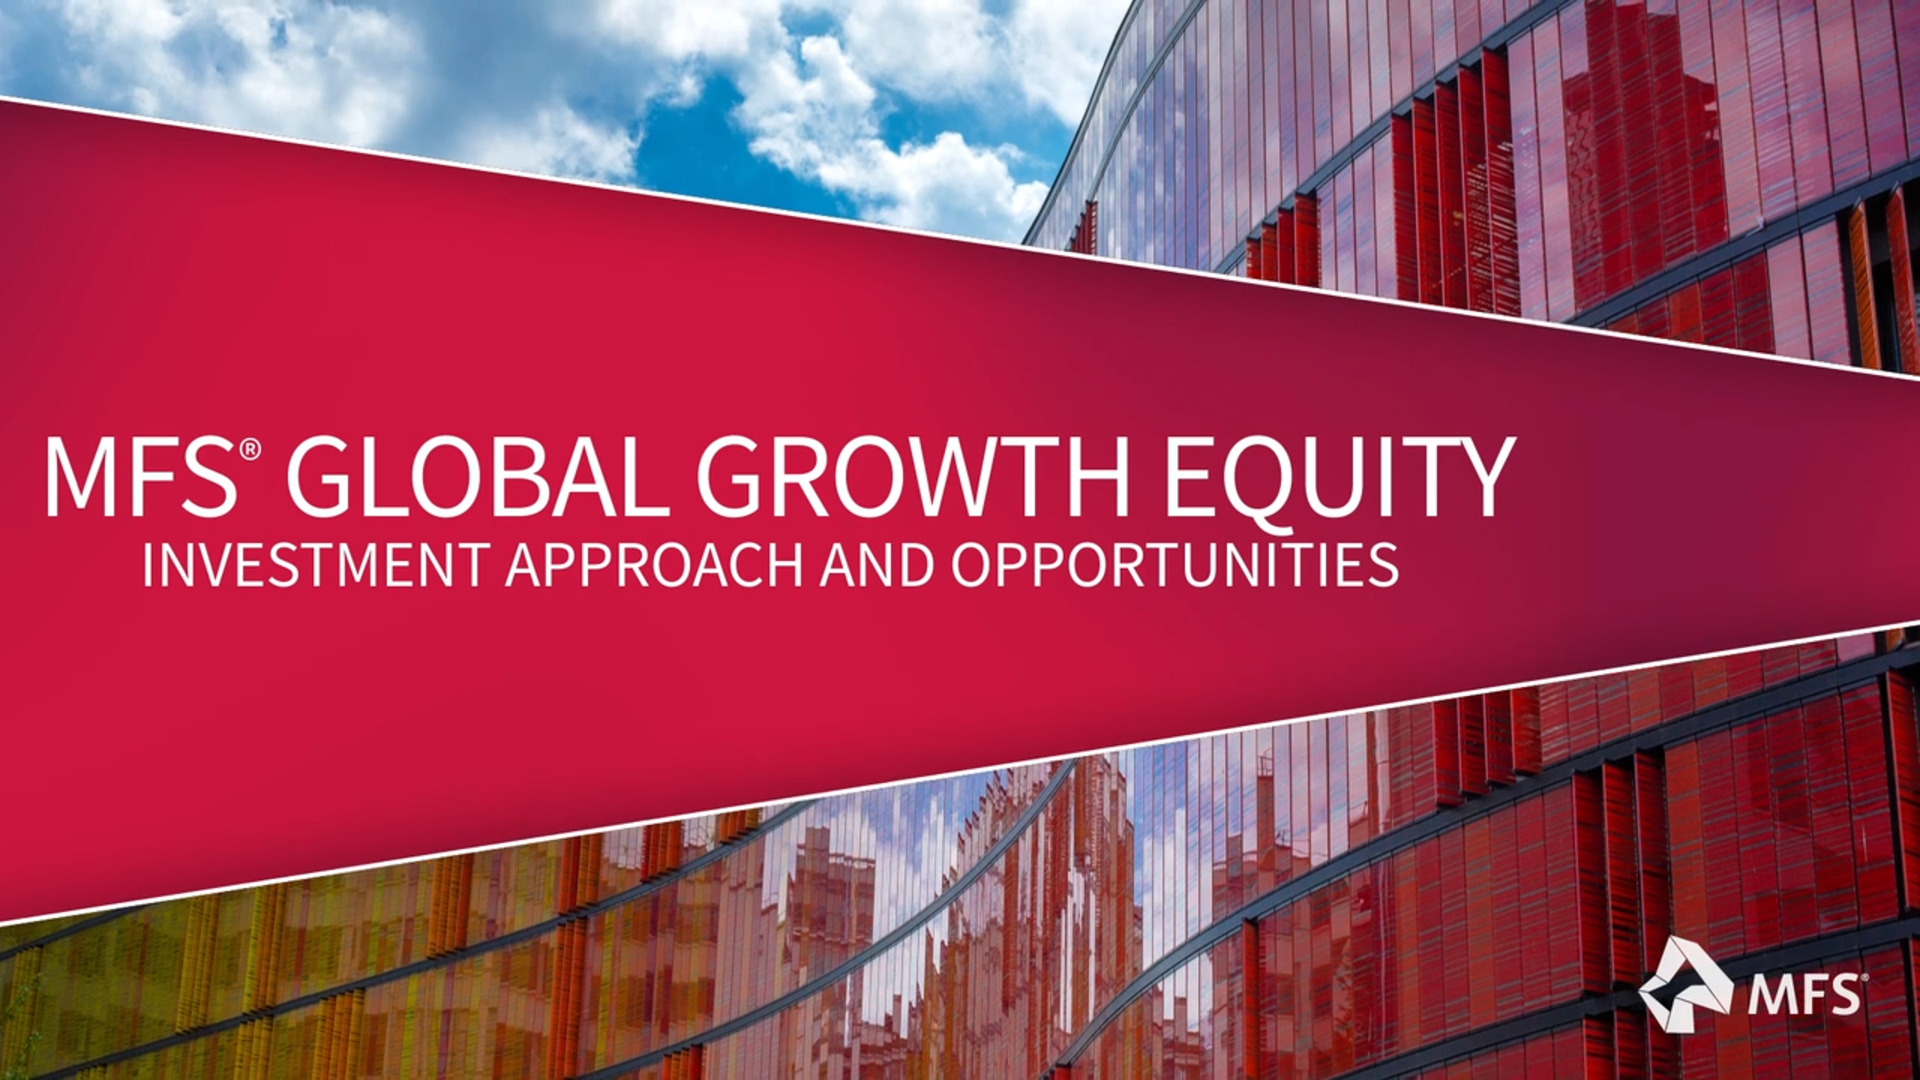 MFS Global Growth Equity Strategy: Investment Approach and Opportunities